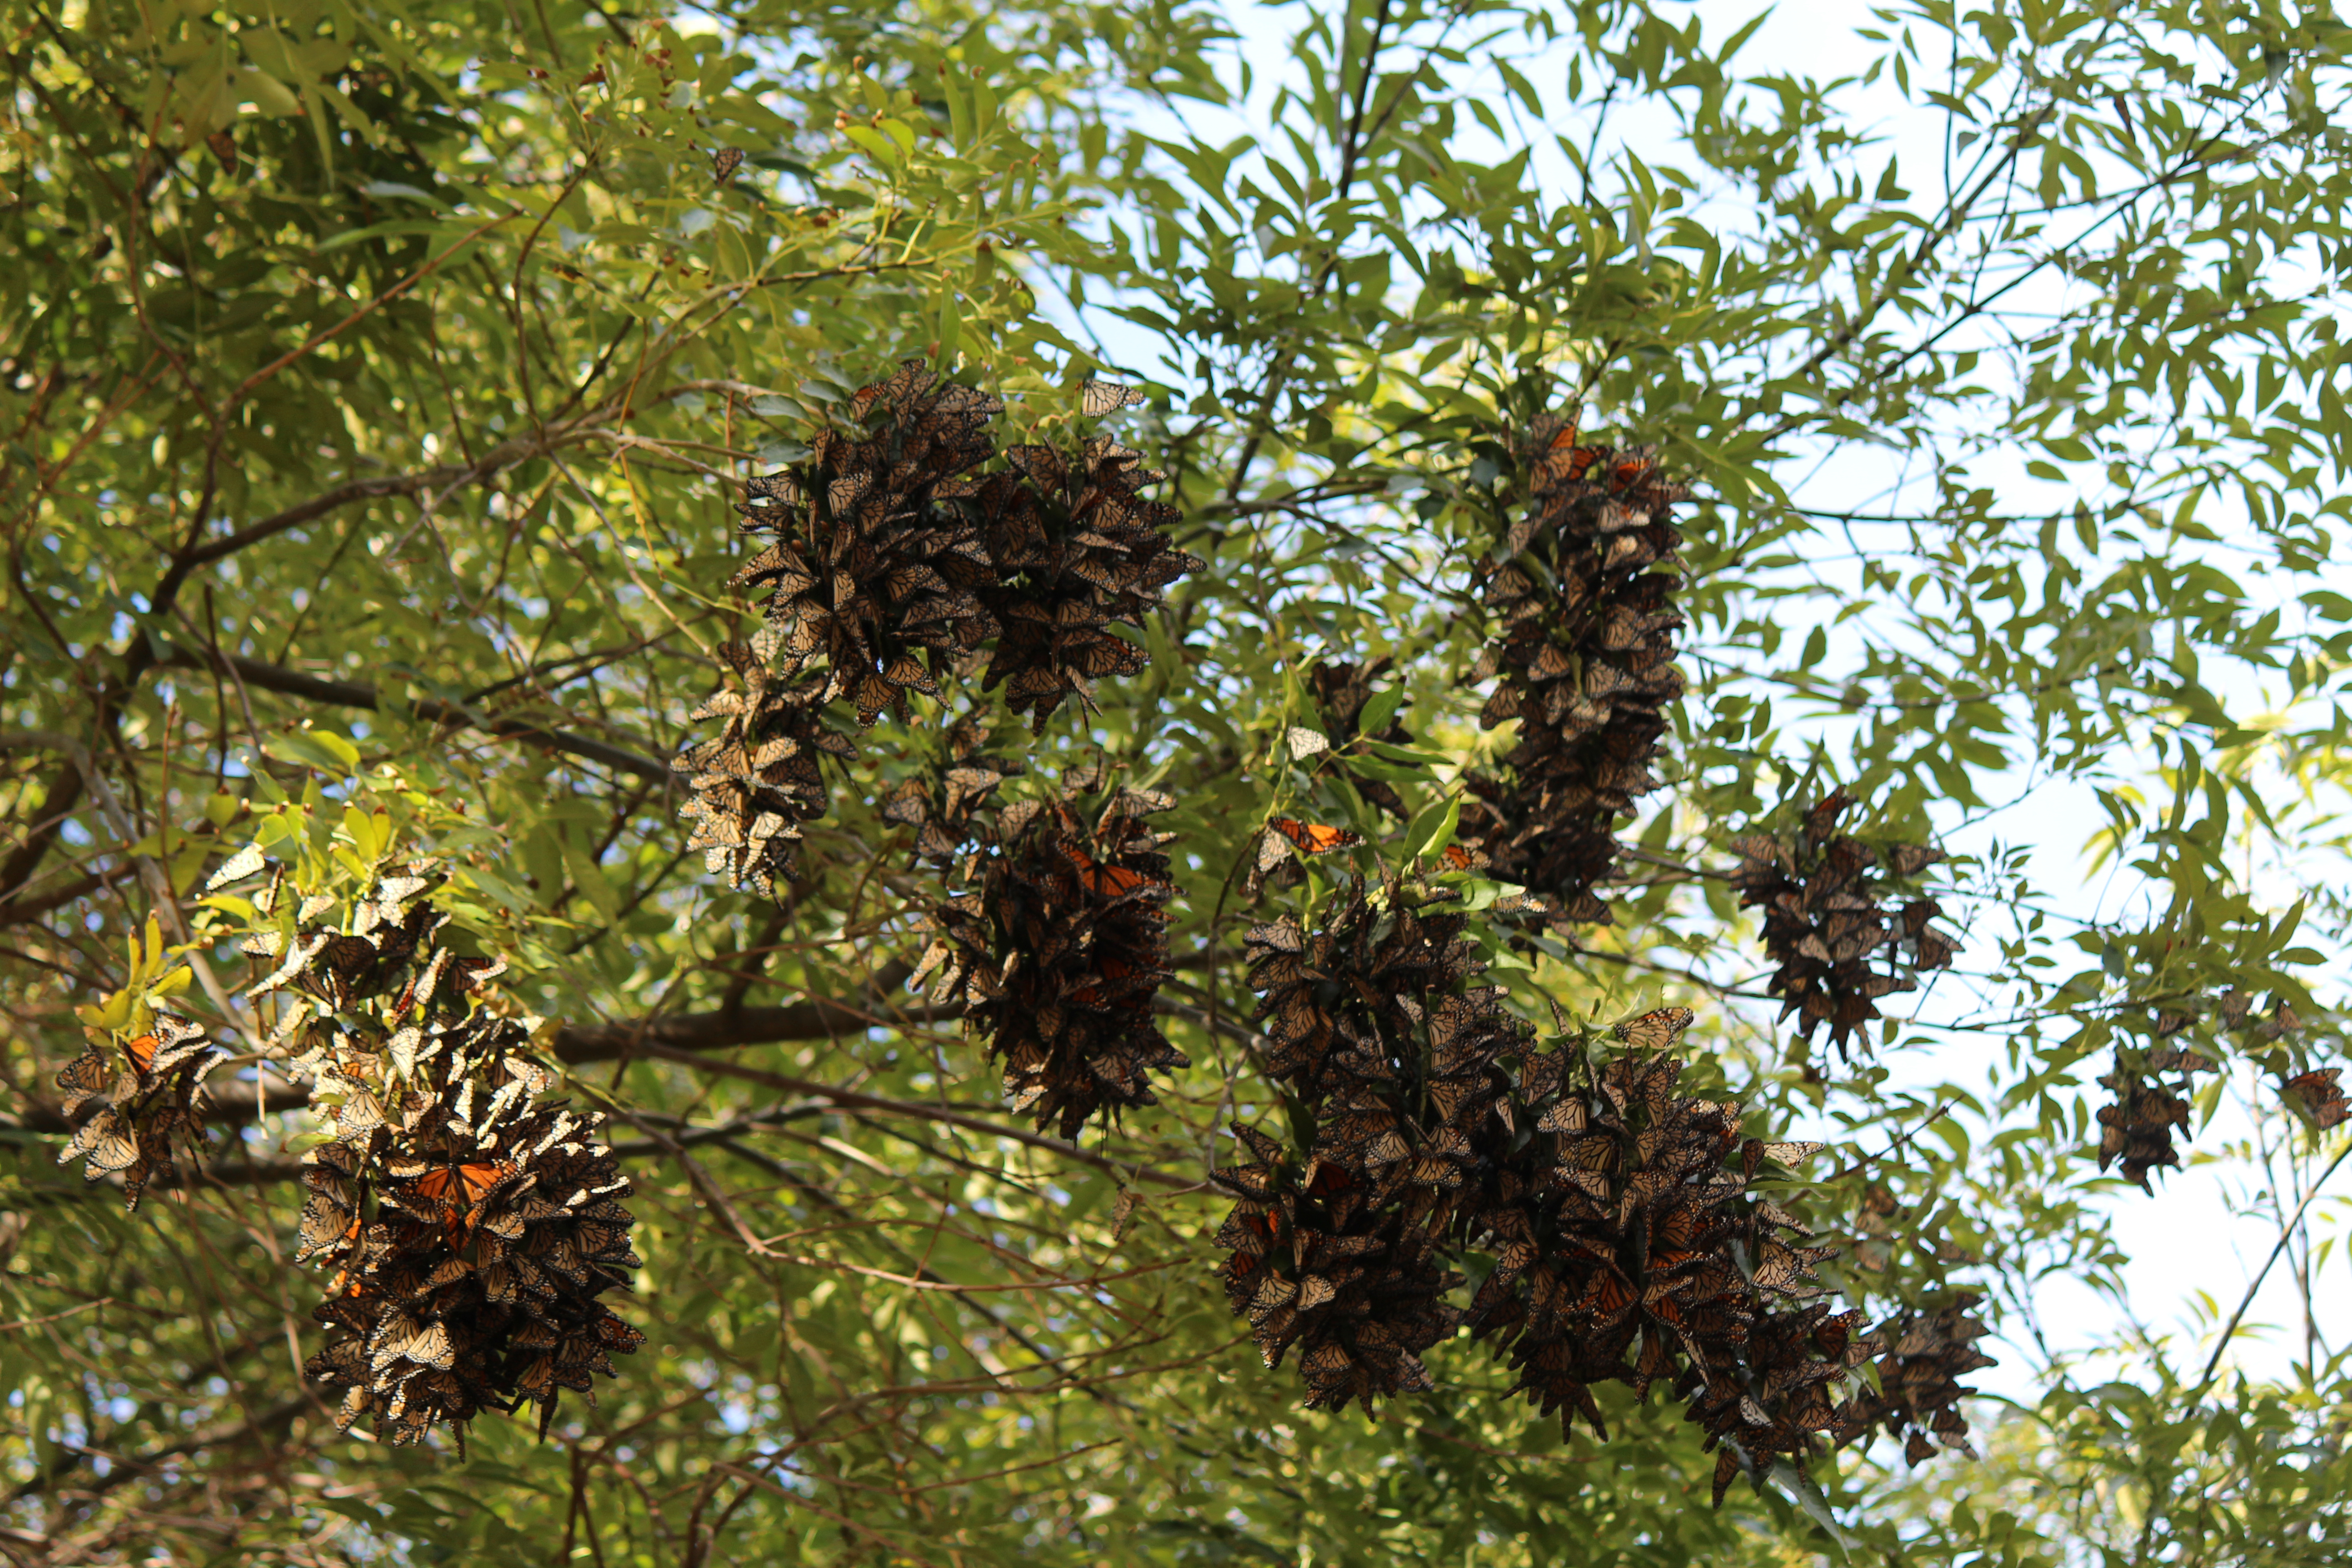 Multiple clusters of monarchs gather on the branches of trees.